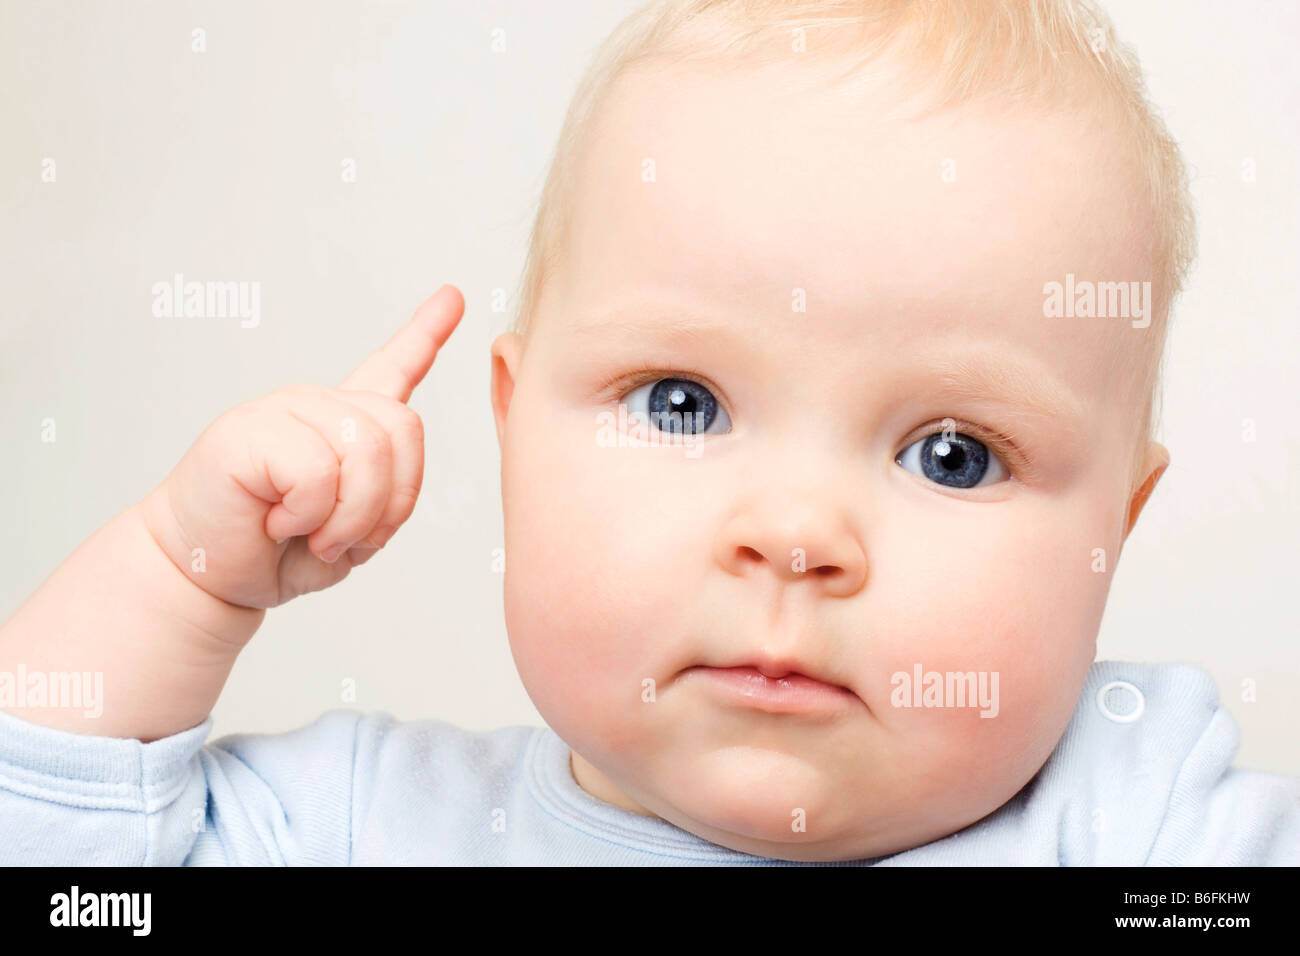 Baby, 7 months old, holding one finger up, portrait Stock Photo